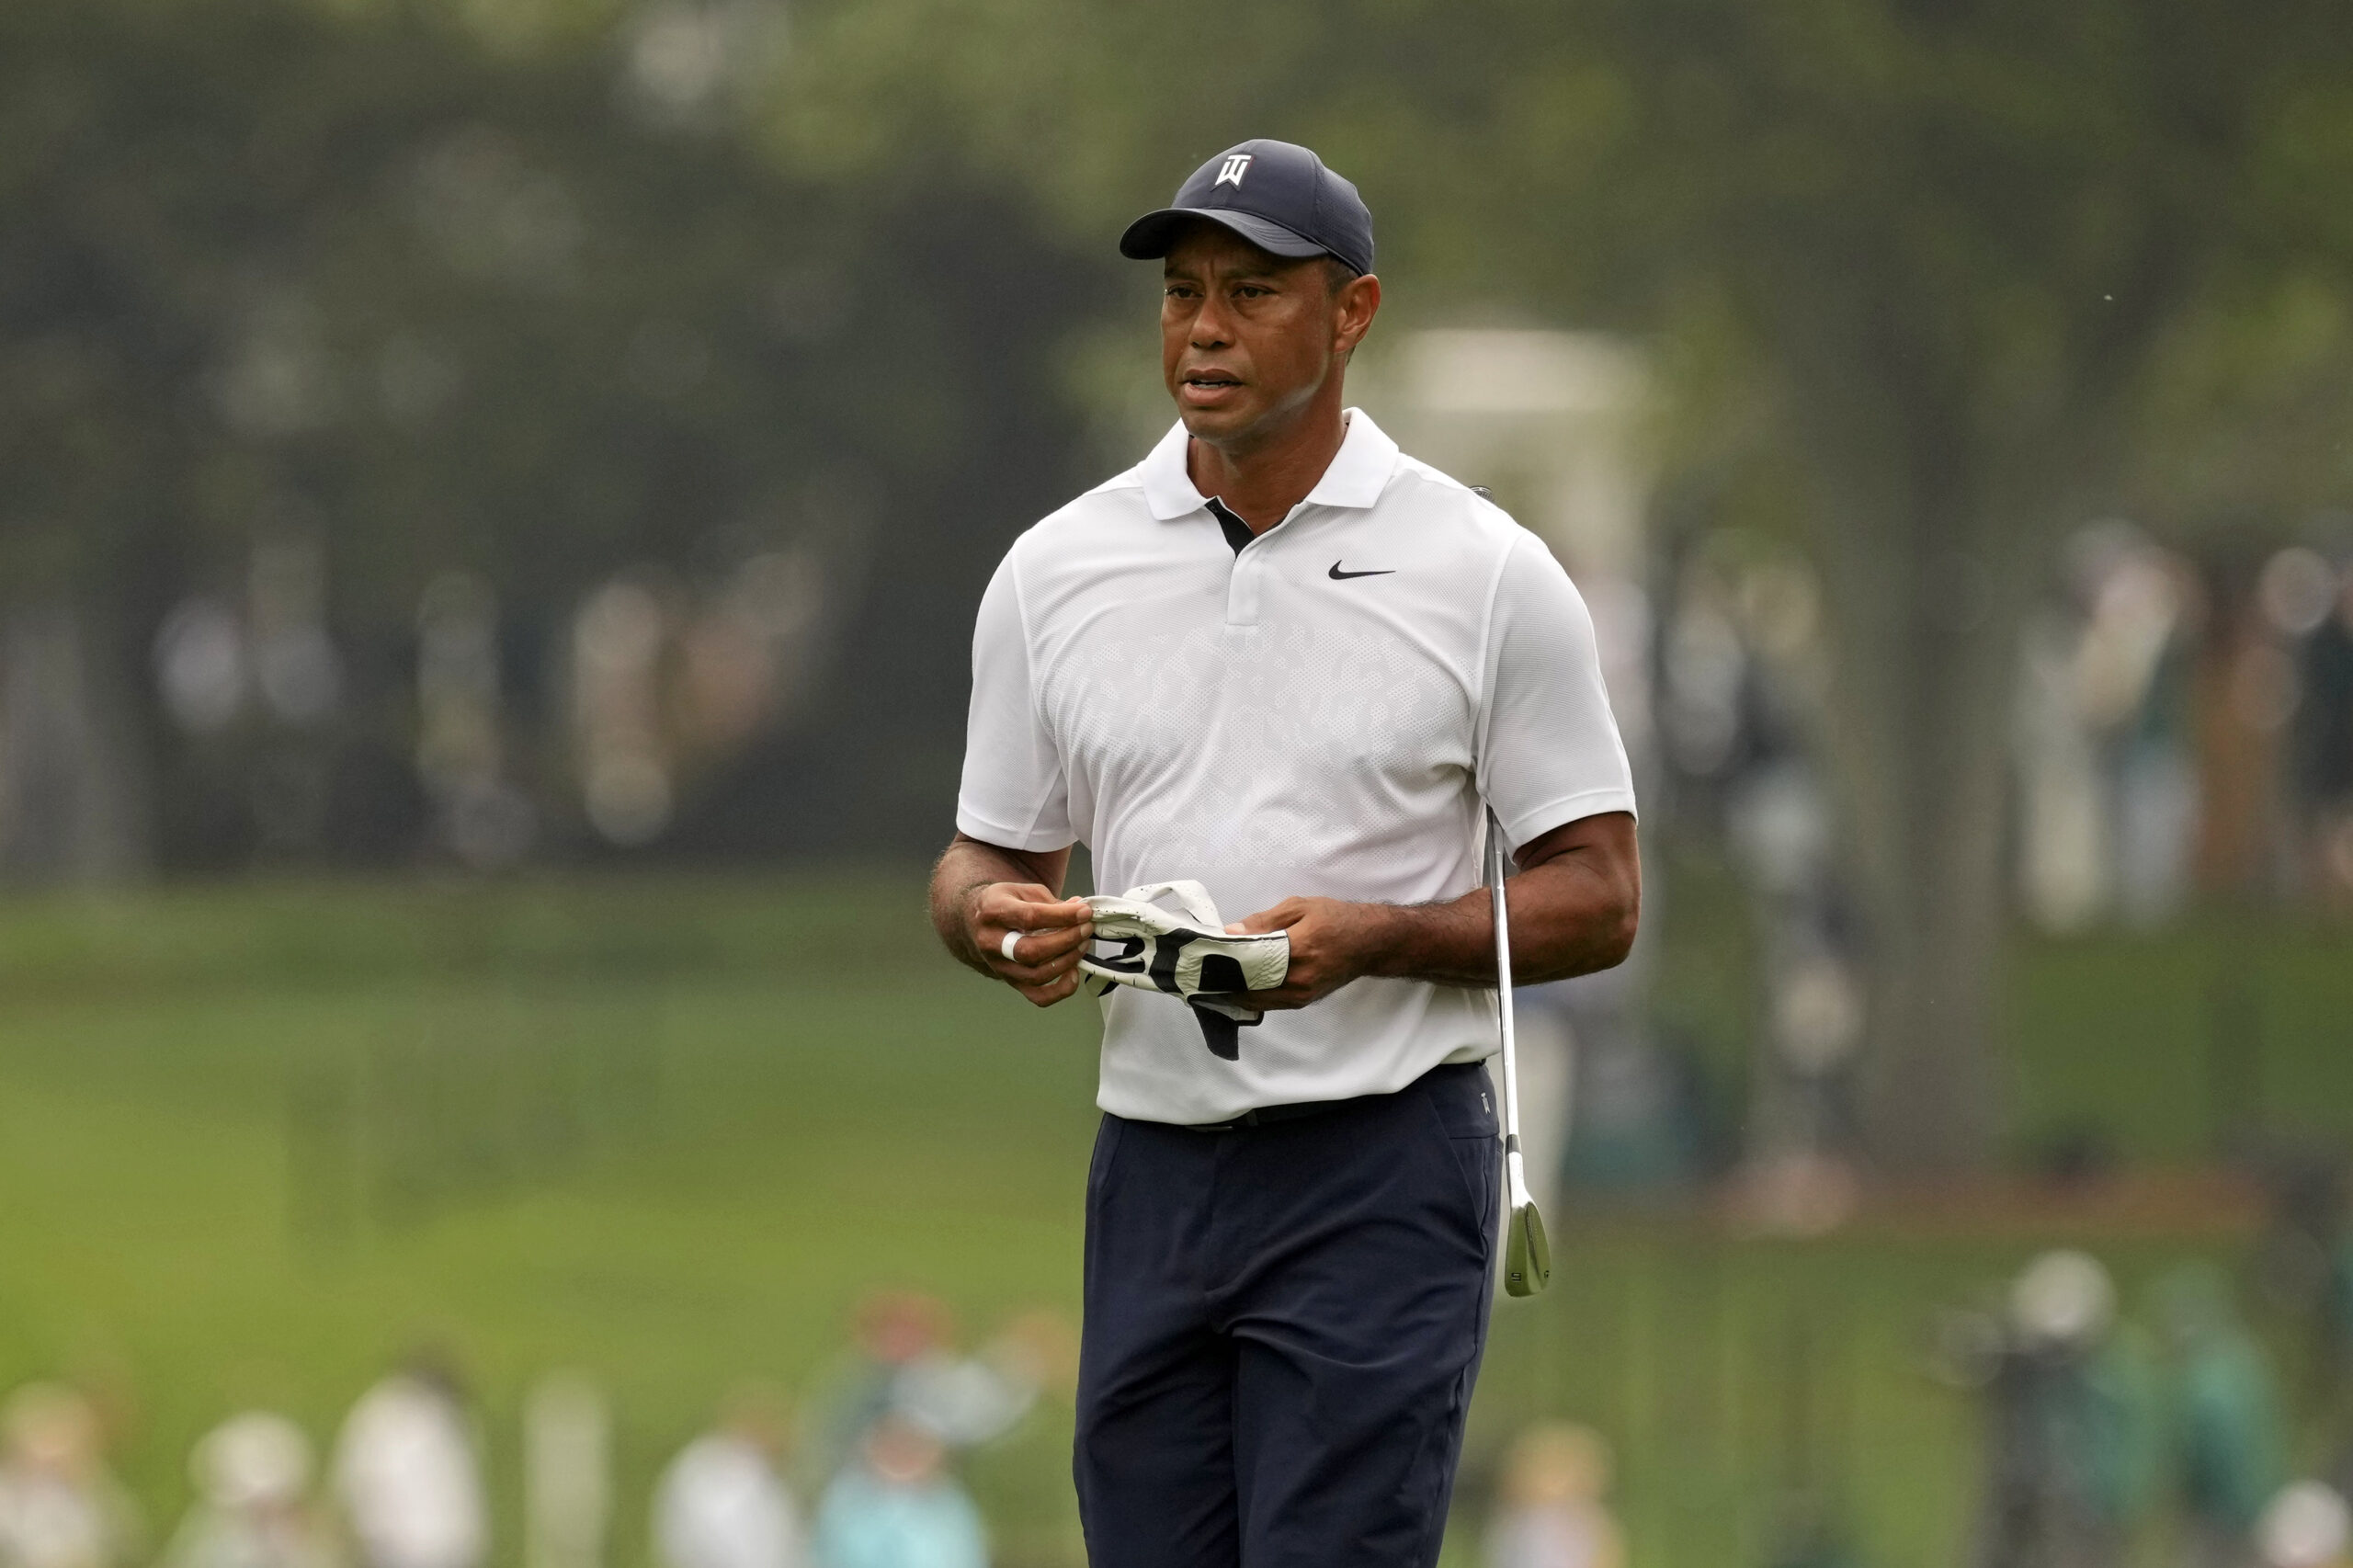 Shot-by-shot updates: Tiger Woods’ 2-over 74 Thursday at the 2023 Masters